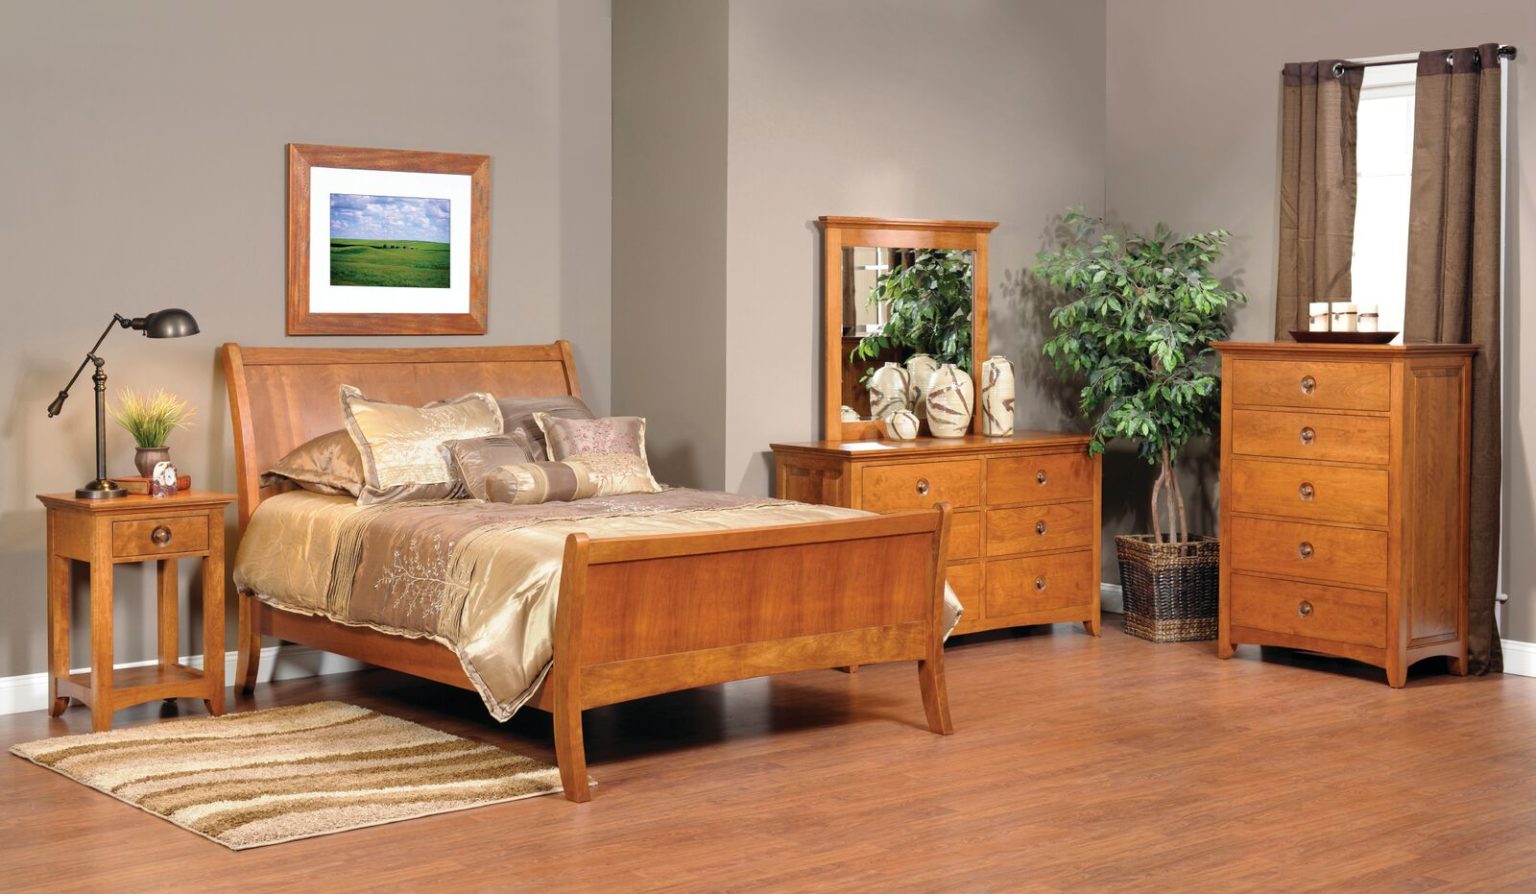 kingston bedroom furniture collection